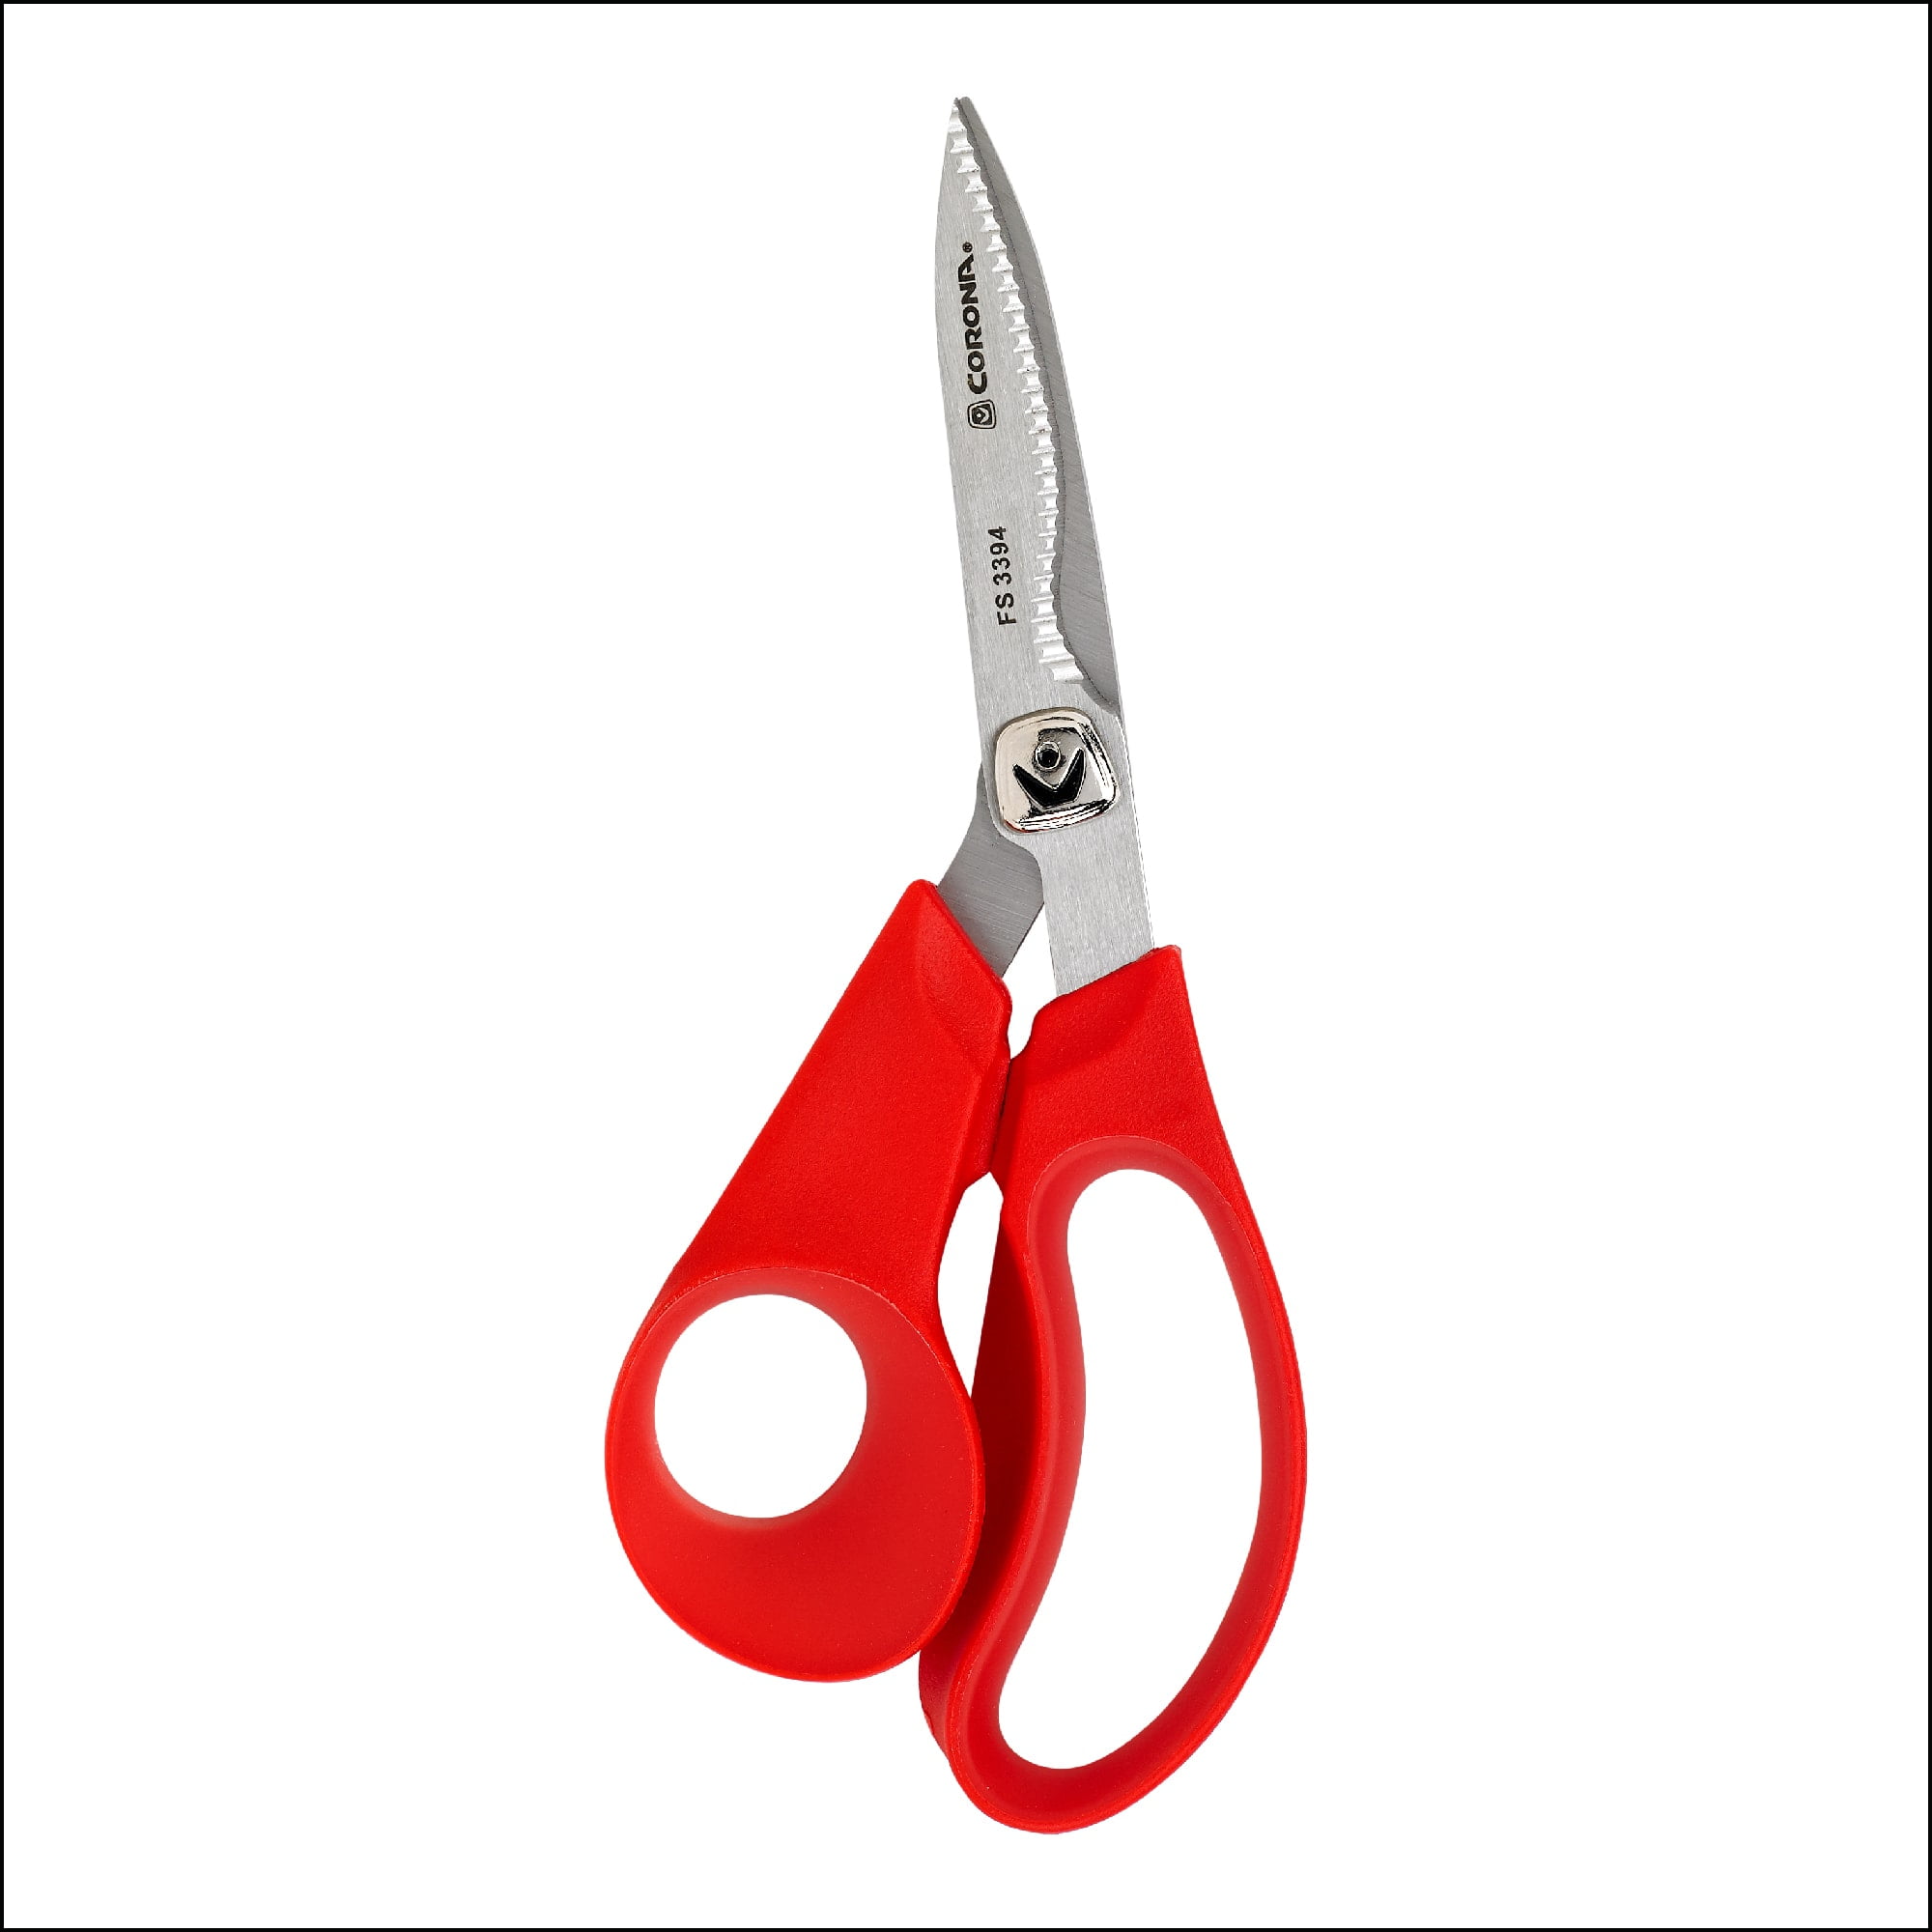 Corona Stainless Steel Floral Scissors 3 Inch Blade FS 4000 